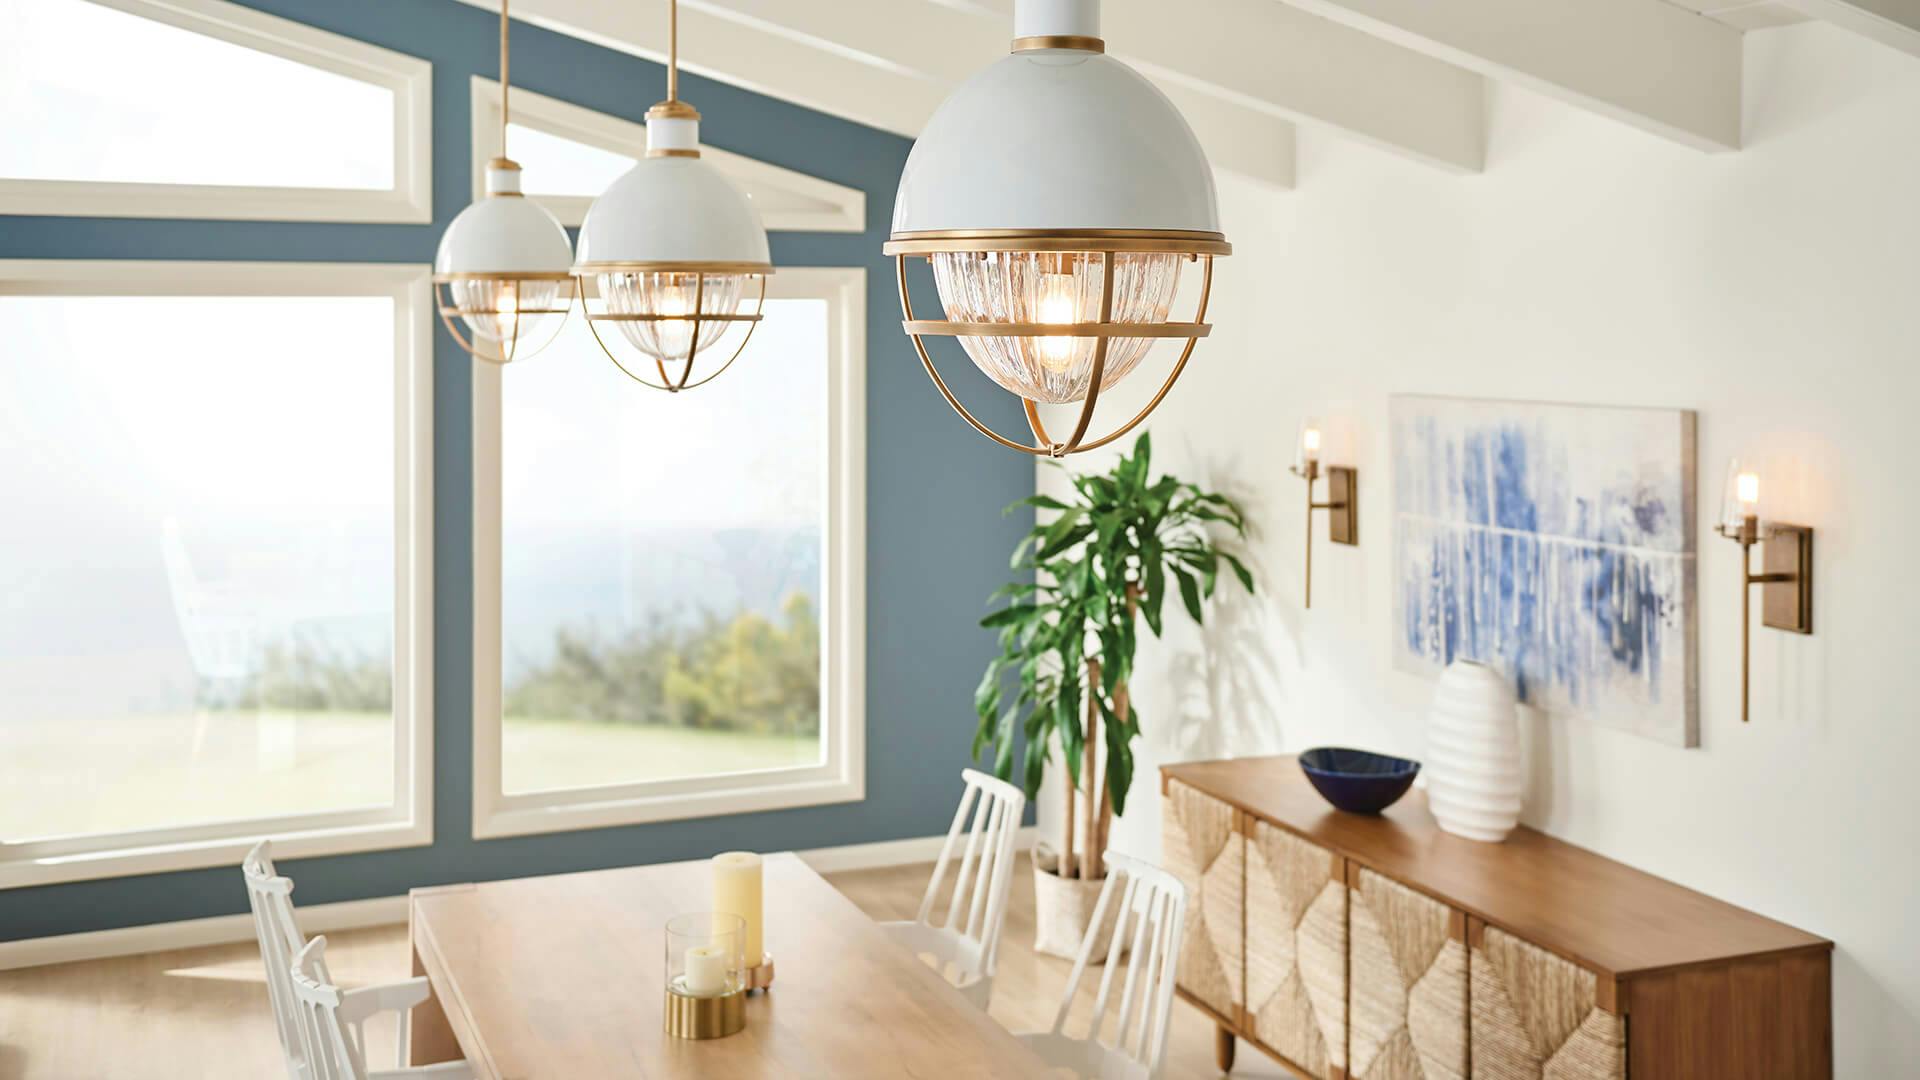 Dining room with three Tollis pendants during the day.